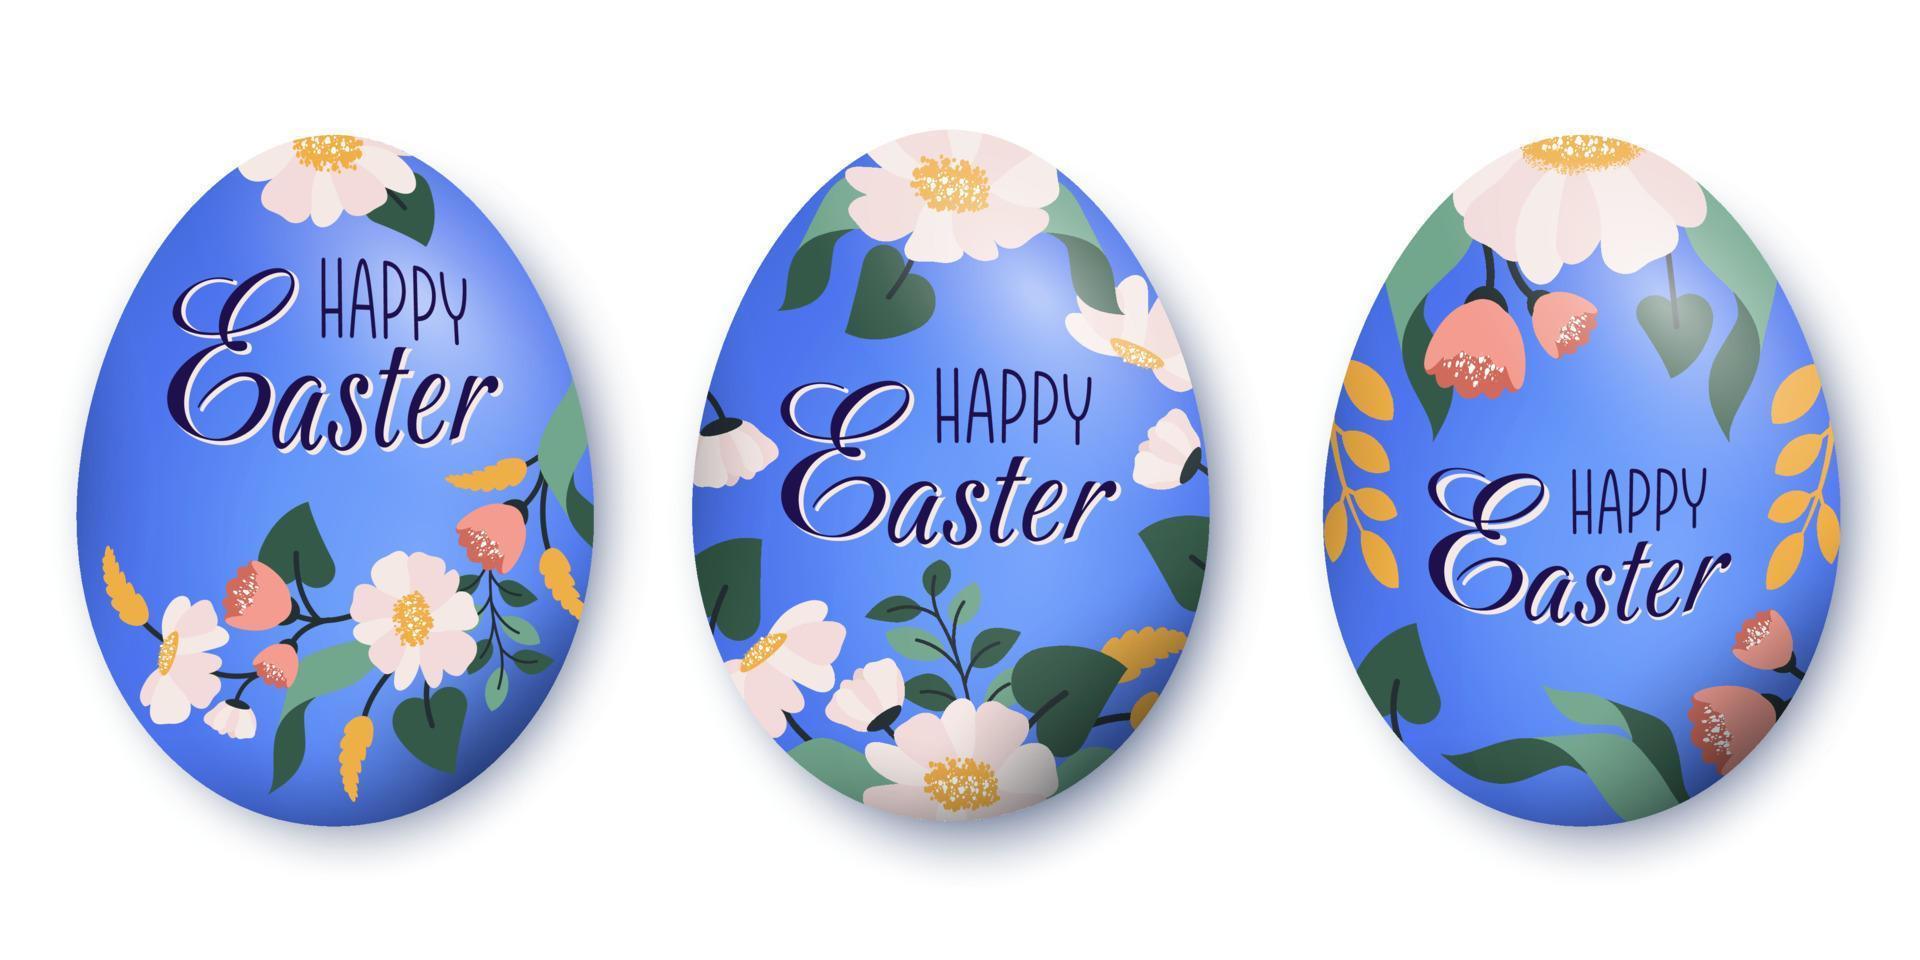 Happy easter. Set of blue floral Easter eggs isolated. Holiday seasonal religious symbol with flower ornament for spring holiday. Festive dyed egg decorated flower pattern. Vector flat illustration